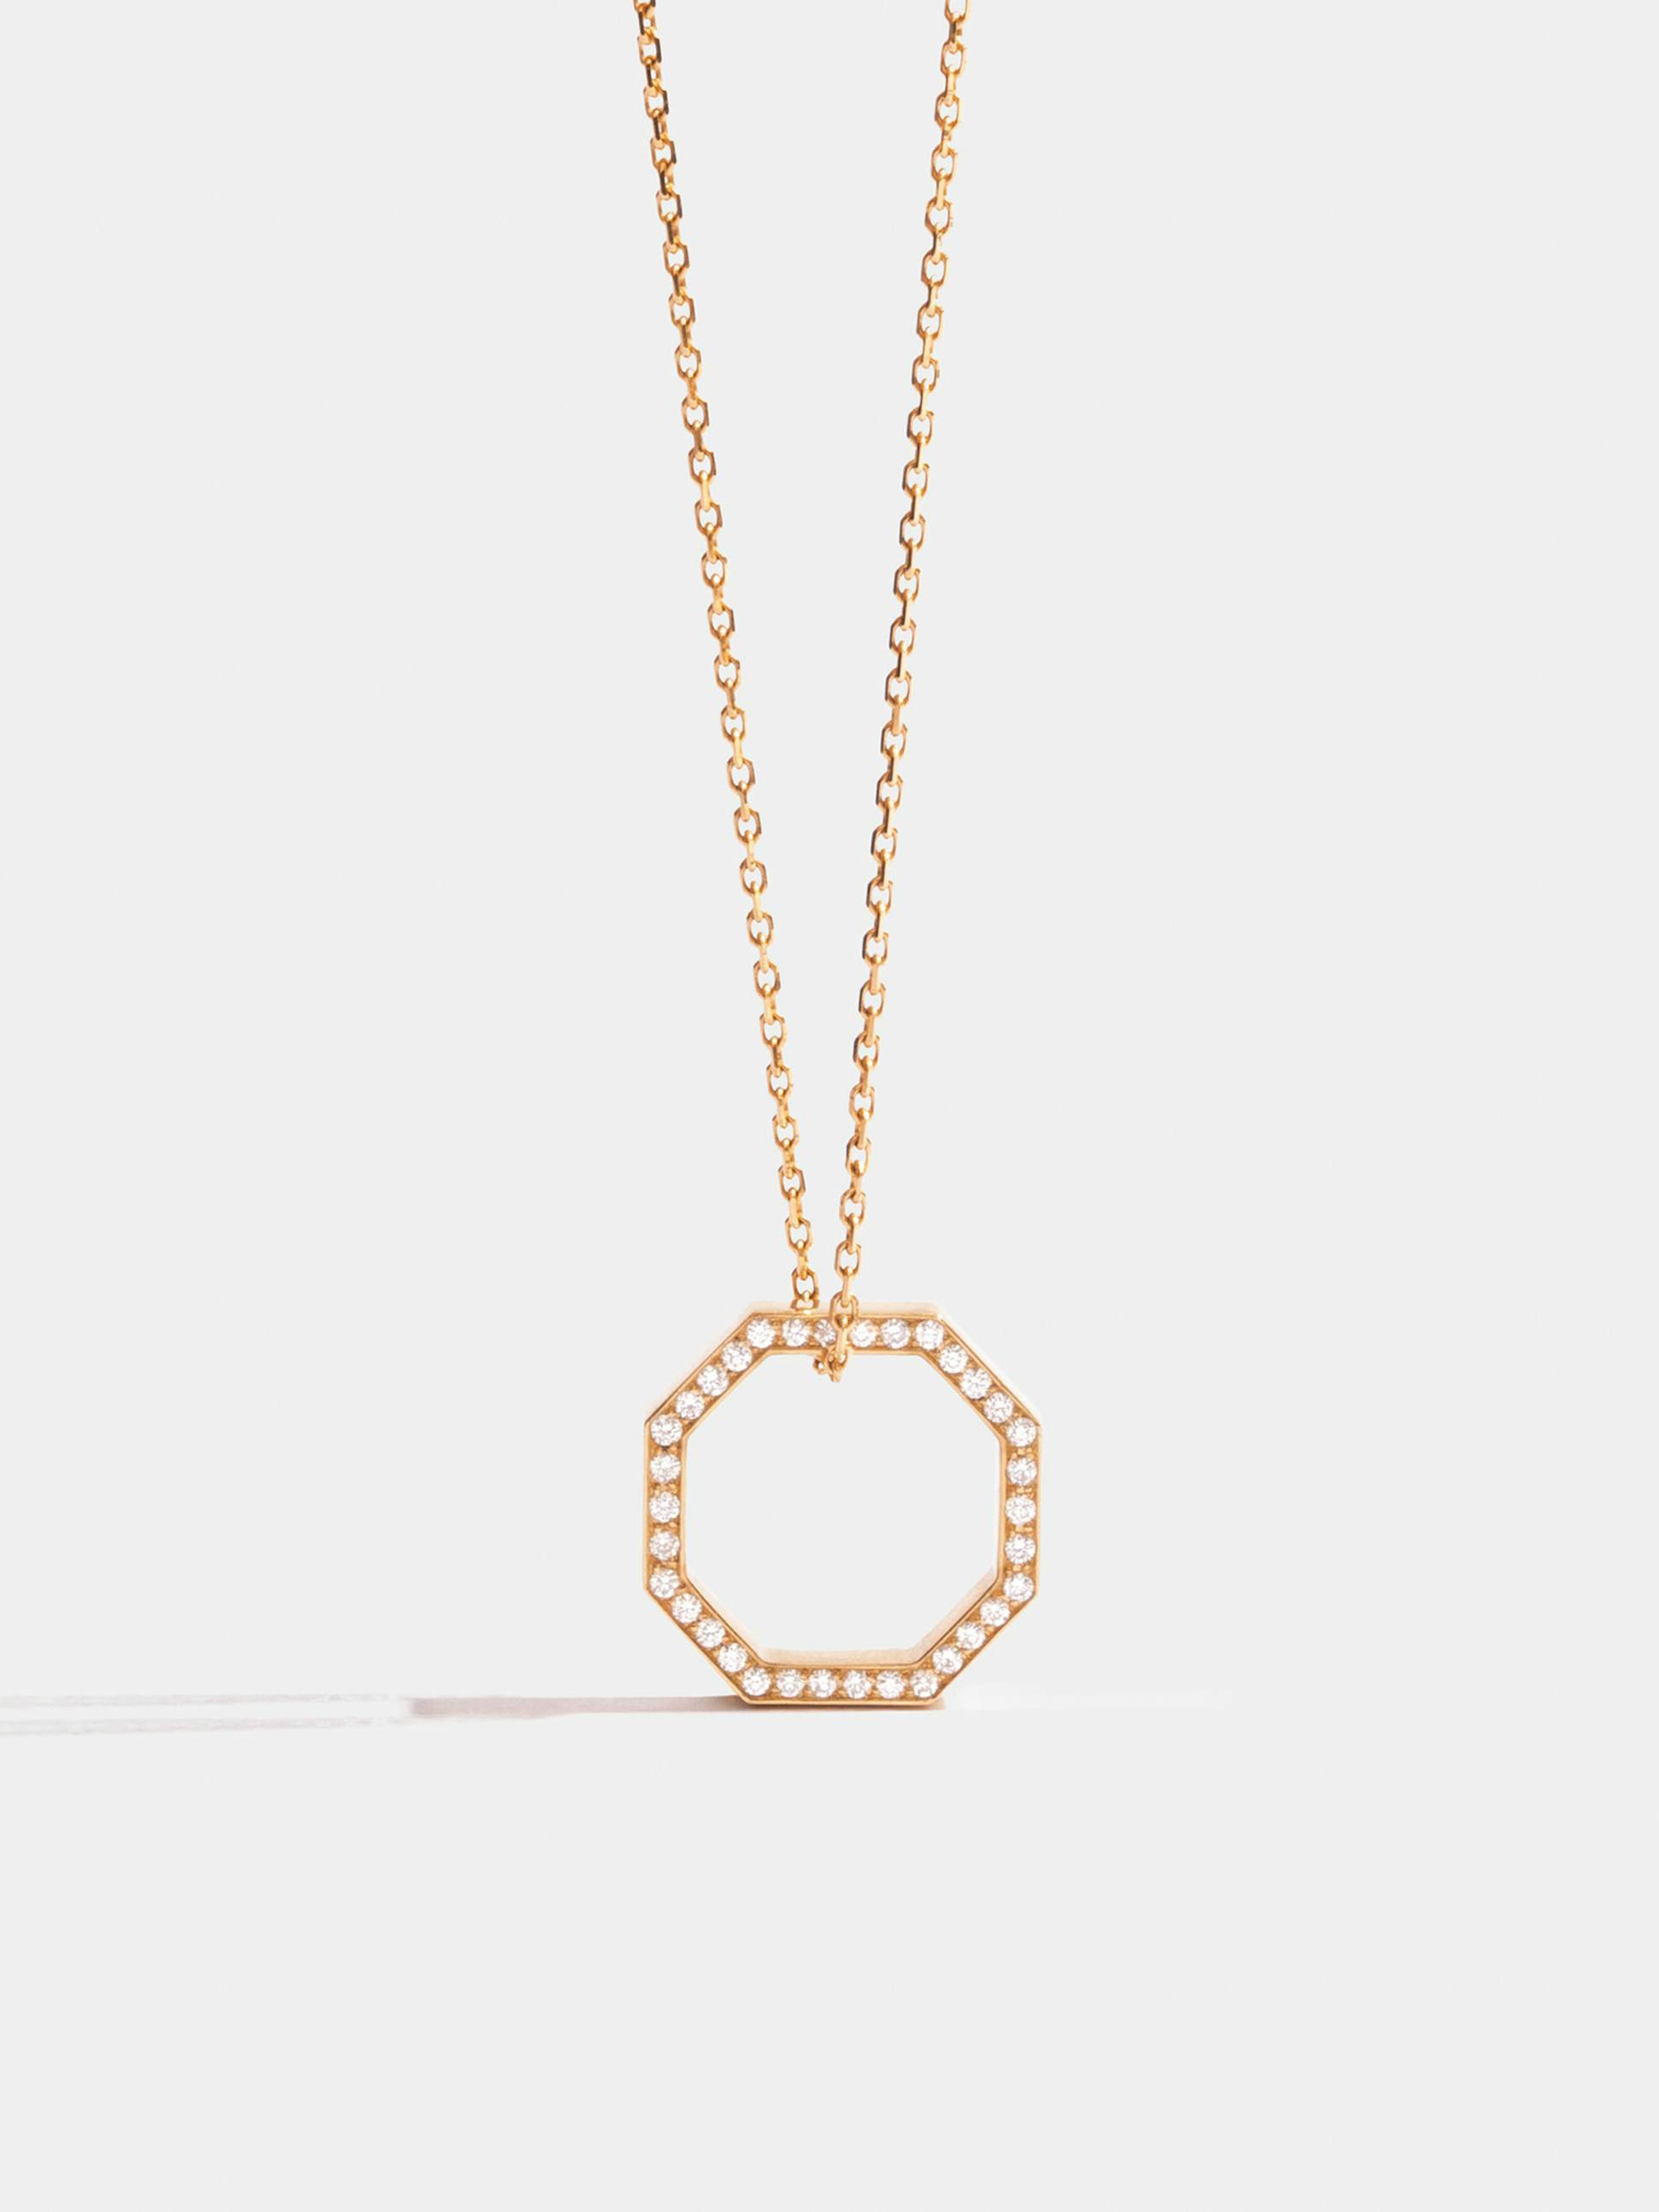 Octogone 14mm pendant in 18k Fairmined ethical yellow gold, paved with lab-grown diamonds, on a chain.